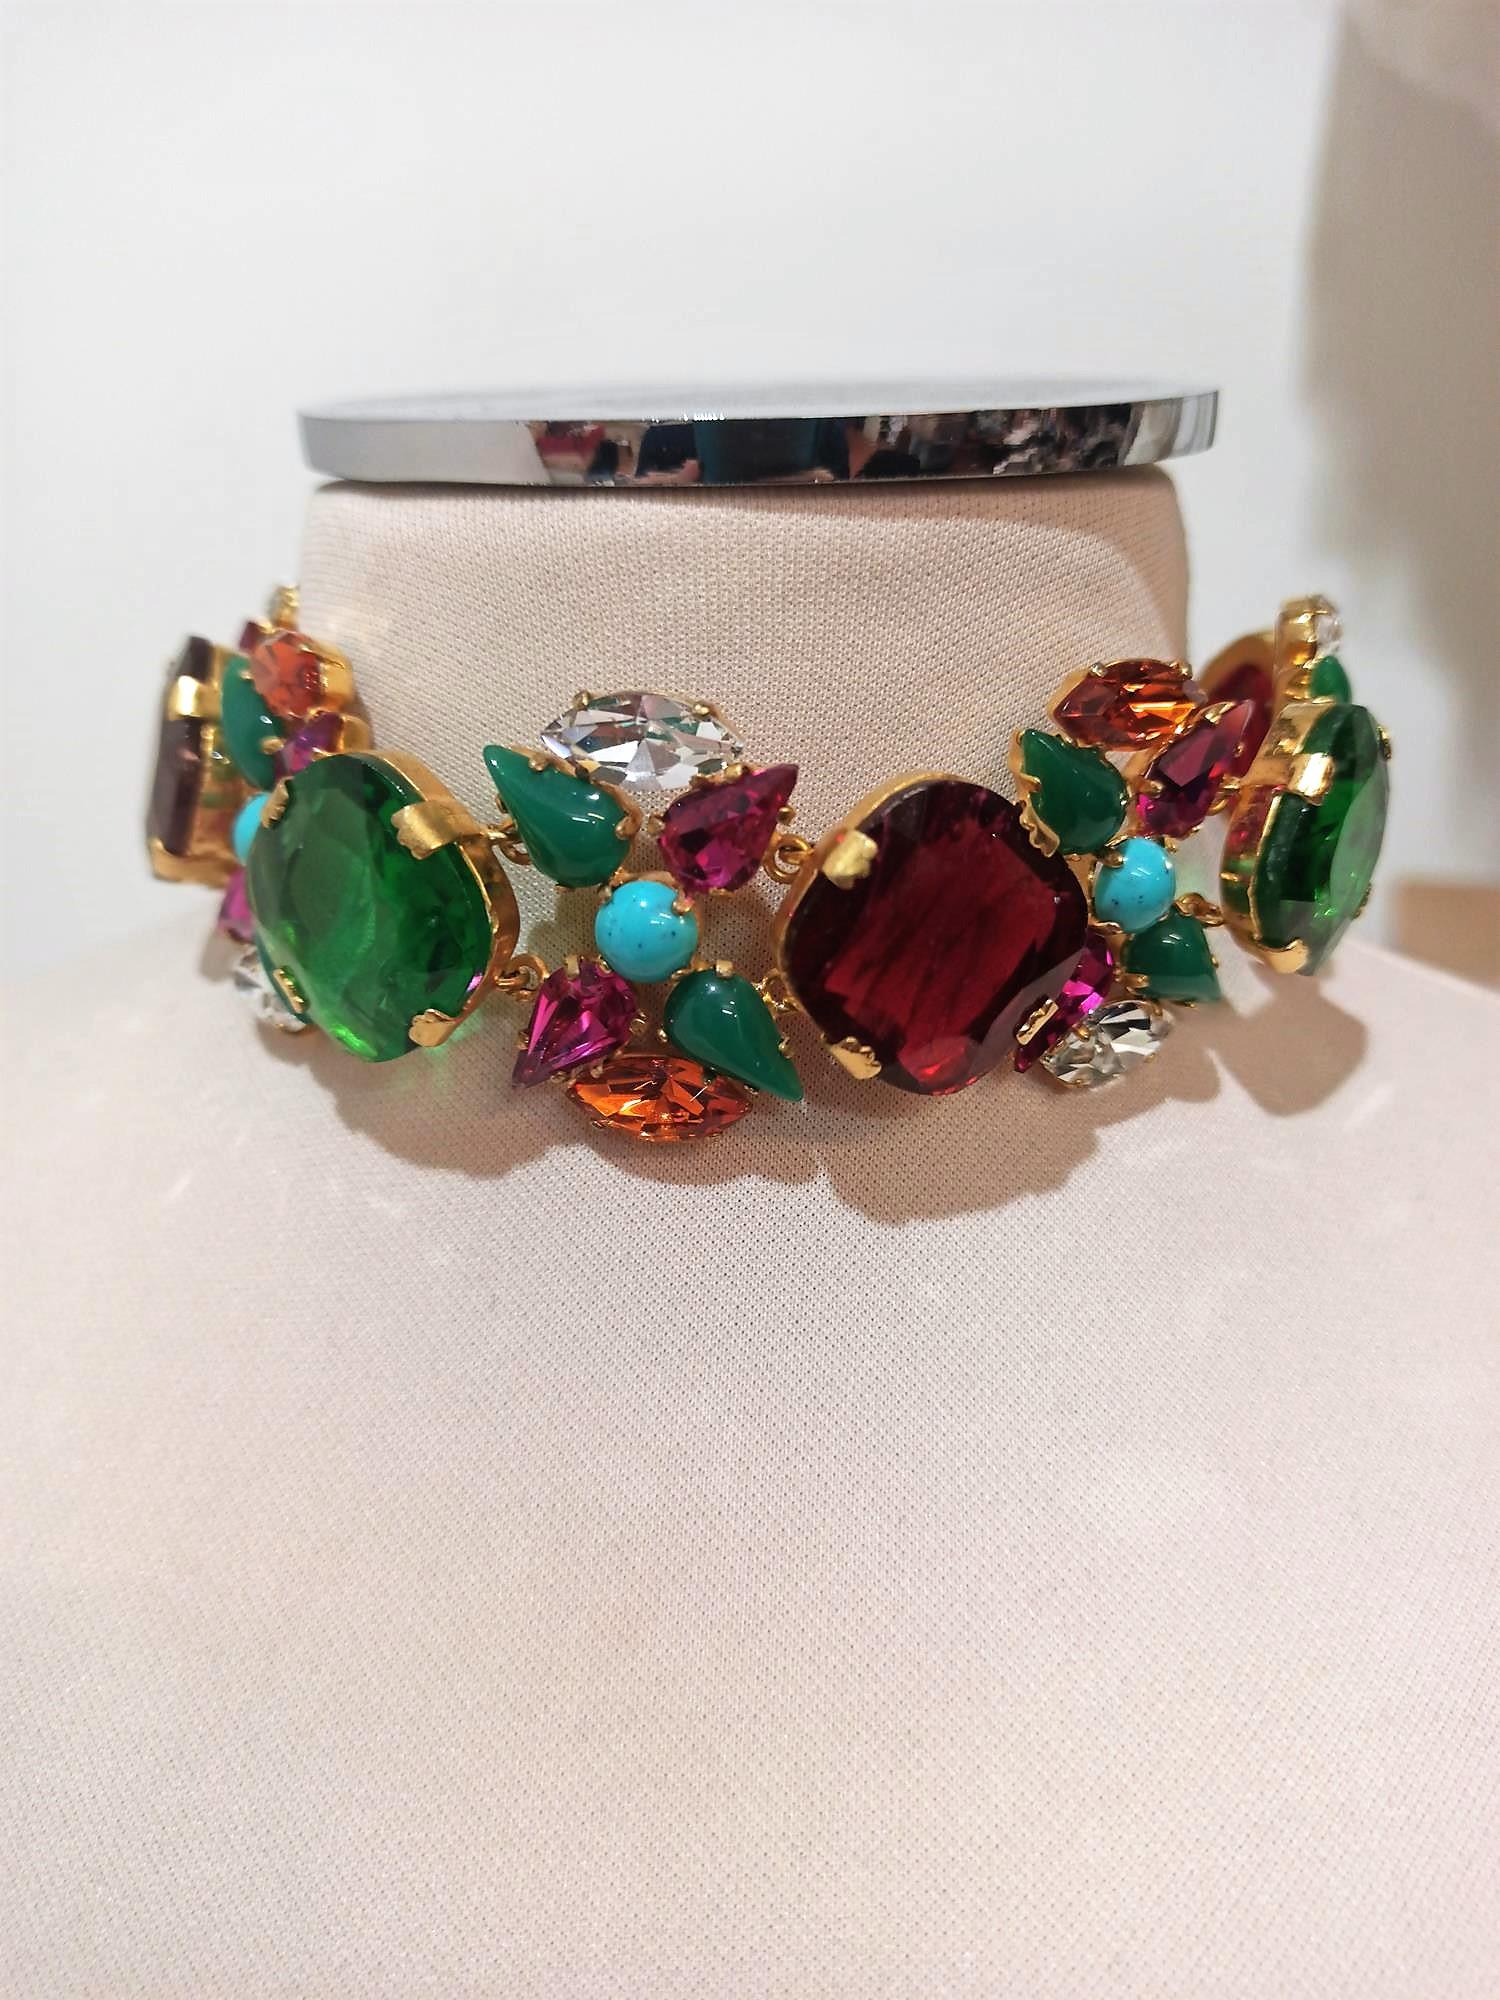 Fantastic piece by Carlo Zini
One of the world greatest bijoux designers
Non allergenic brass
18 KT Gold dipped
Amazing hand application of swarovski crystals
Multicolored tailor made crystals
100% Artisanal work
Made in Milano
Worldwide express